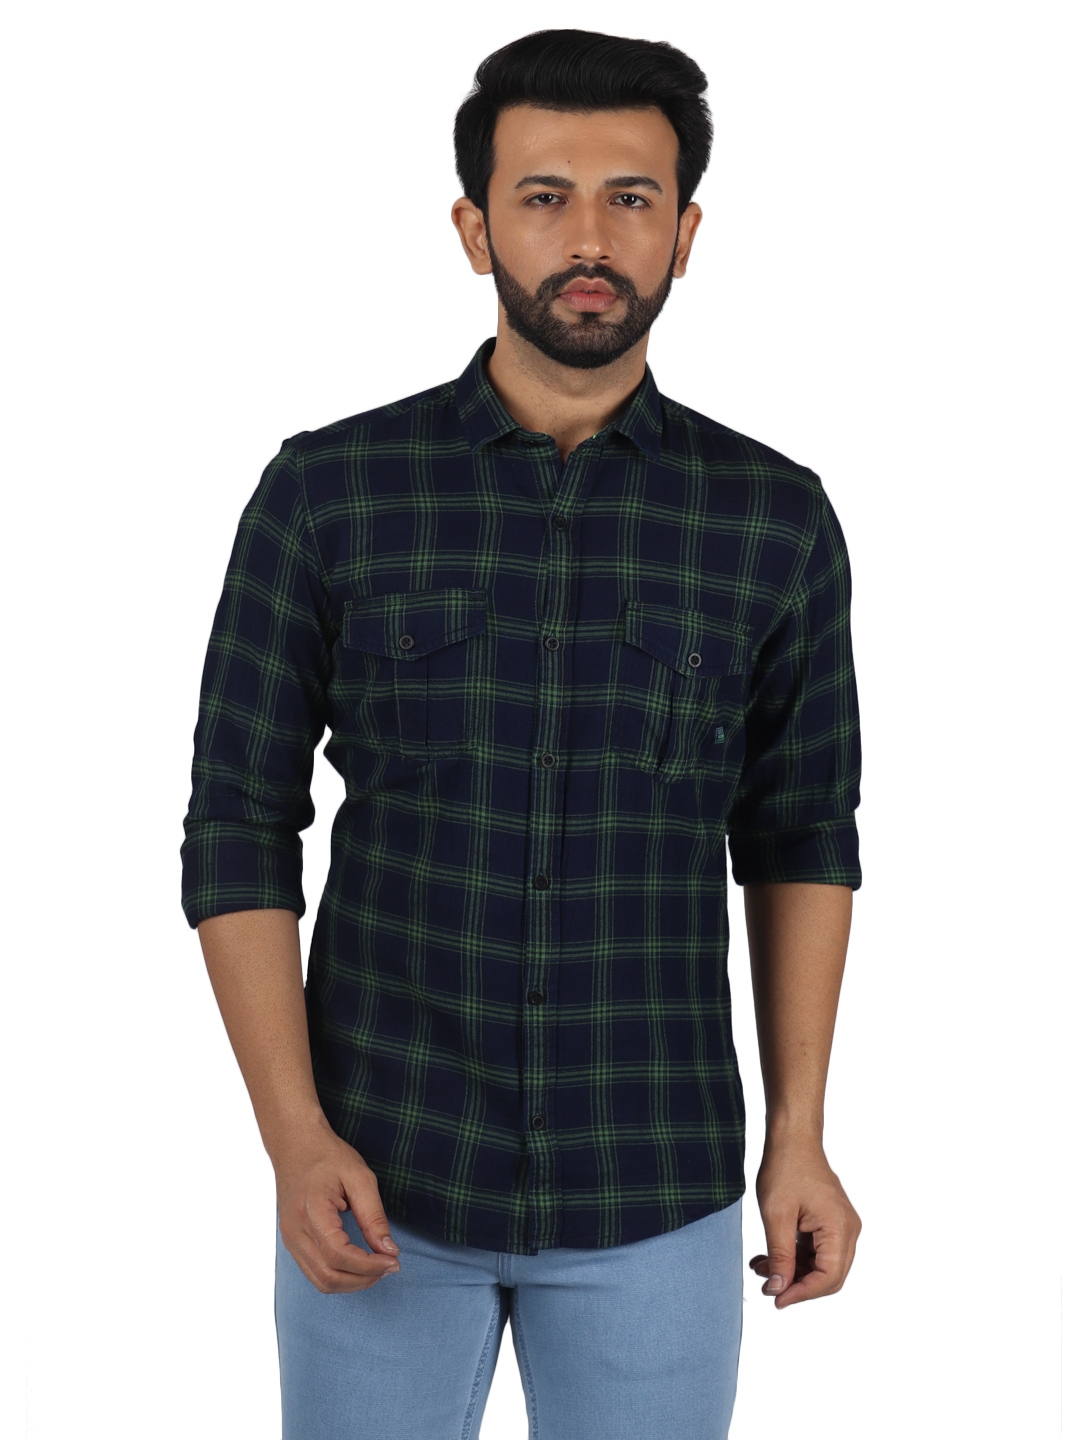 D'cot by Donear | D'cot by Donear Mens Multi Cotton Casual Shirts